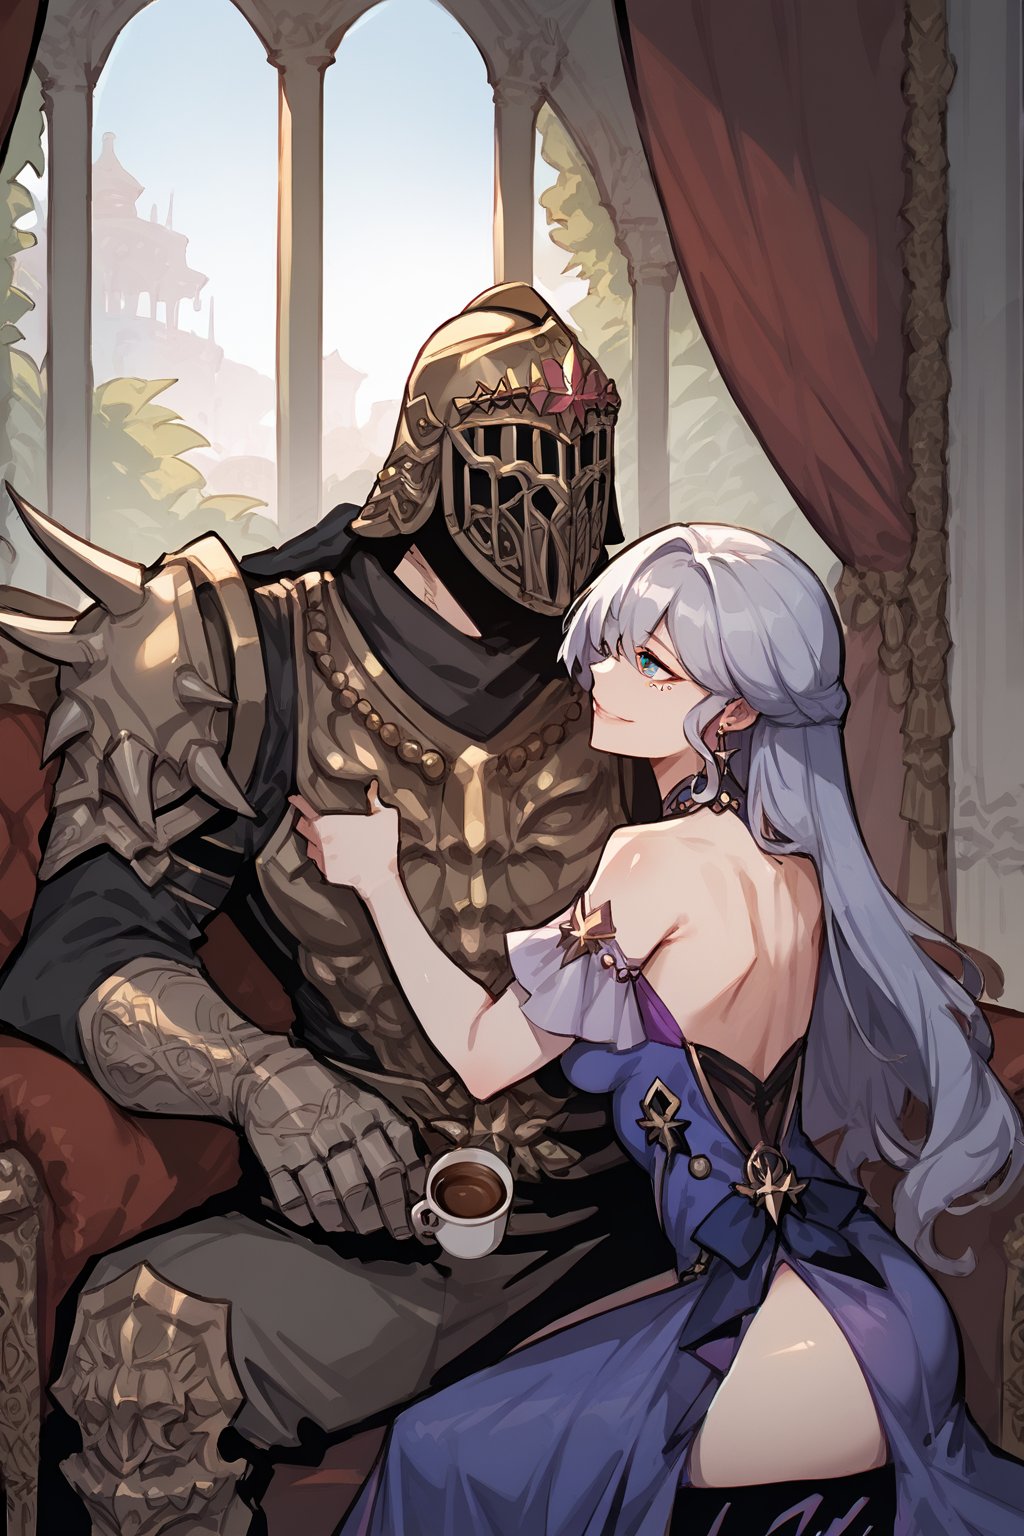 score_9, score_8, score_7, score_8_up, 1boy\(human, giant male, tall male, wearing full madness Armor and helmet, armored\) laying and holding 1girl\(robin \(honkai: star rail\), medium breasts, smile on her face, pouty lips, seductive, wearing traditional harem dress and jewellery\), hugging and resting, sitting on his lap, both staring at each other, Arabian livingroom interior, coffee and grapes, score_7_up, side view